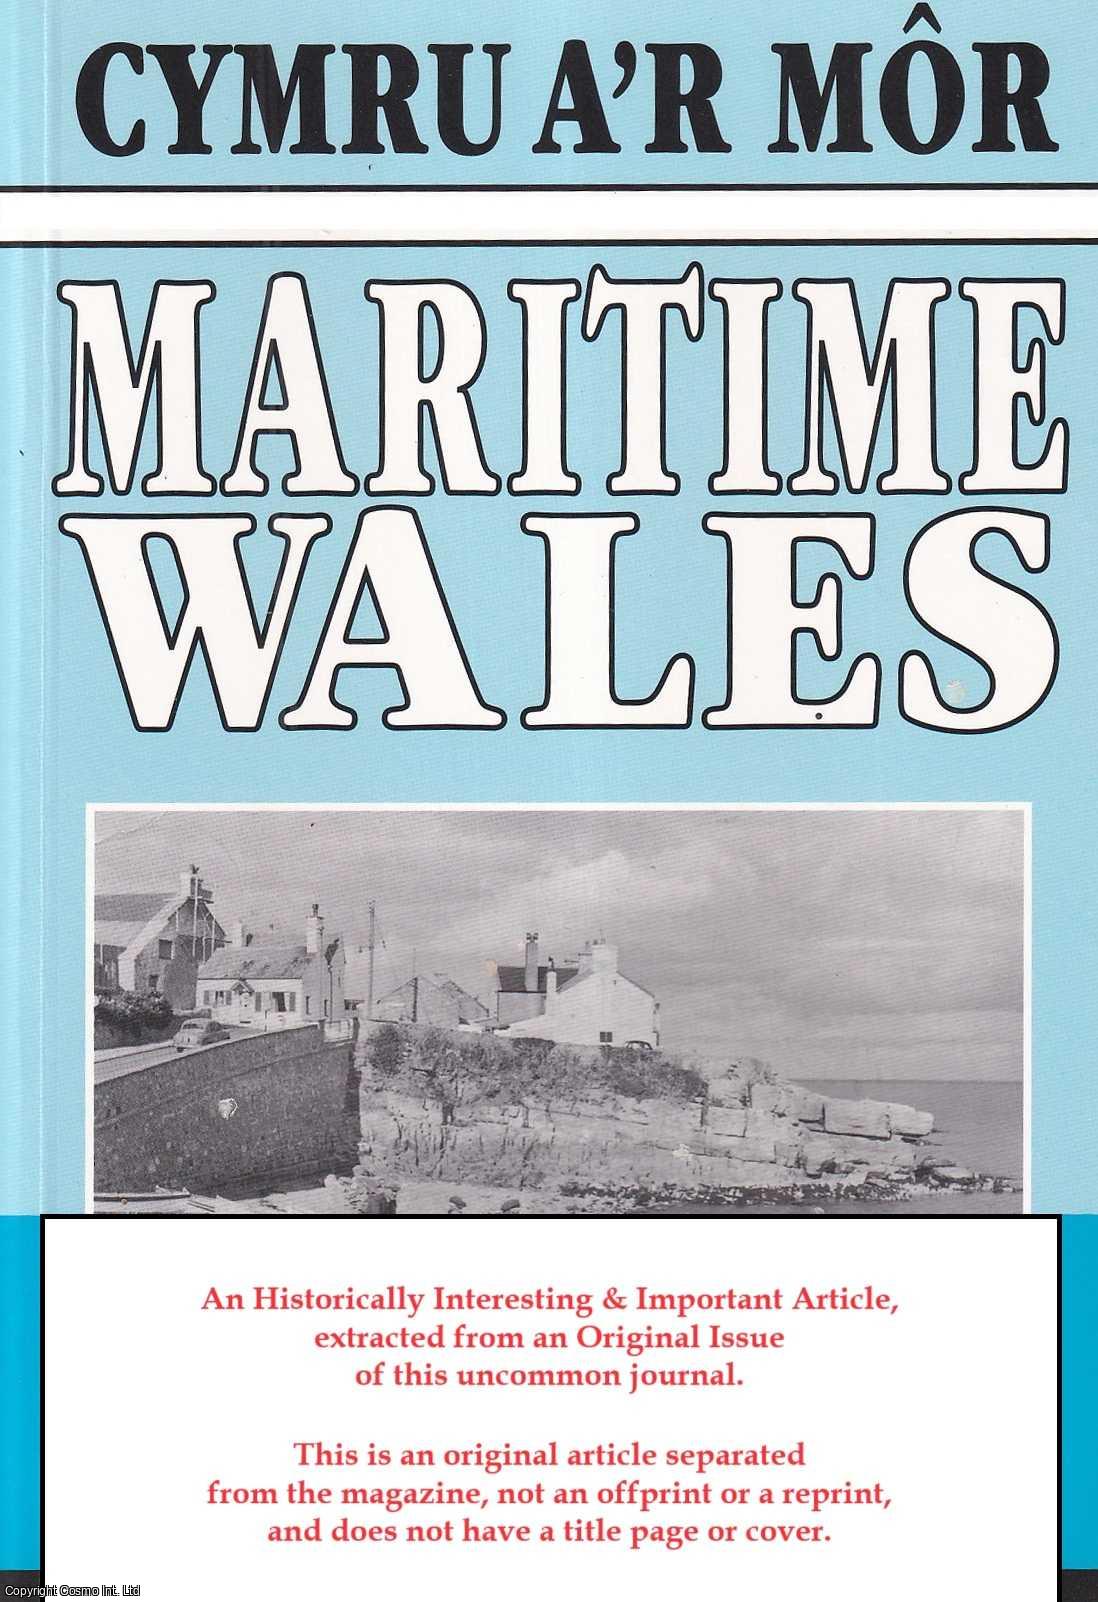 M. K. Stammers - The Welsh Sloop. An original article from Maritime Wales, 2000.